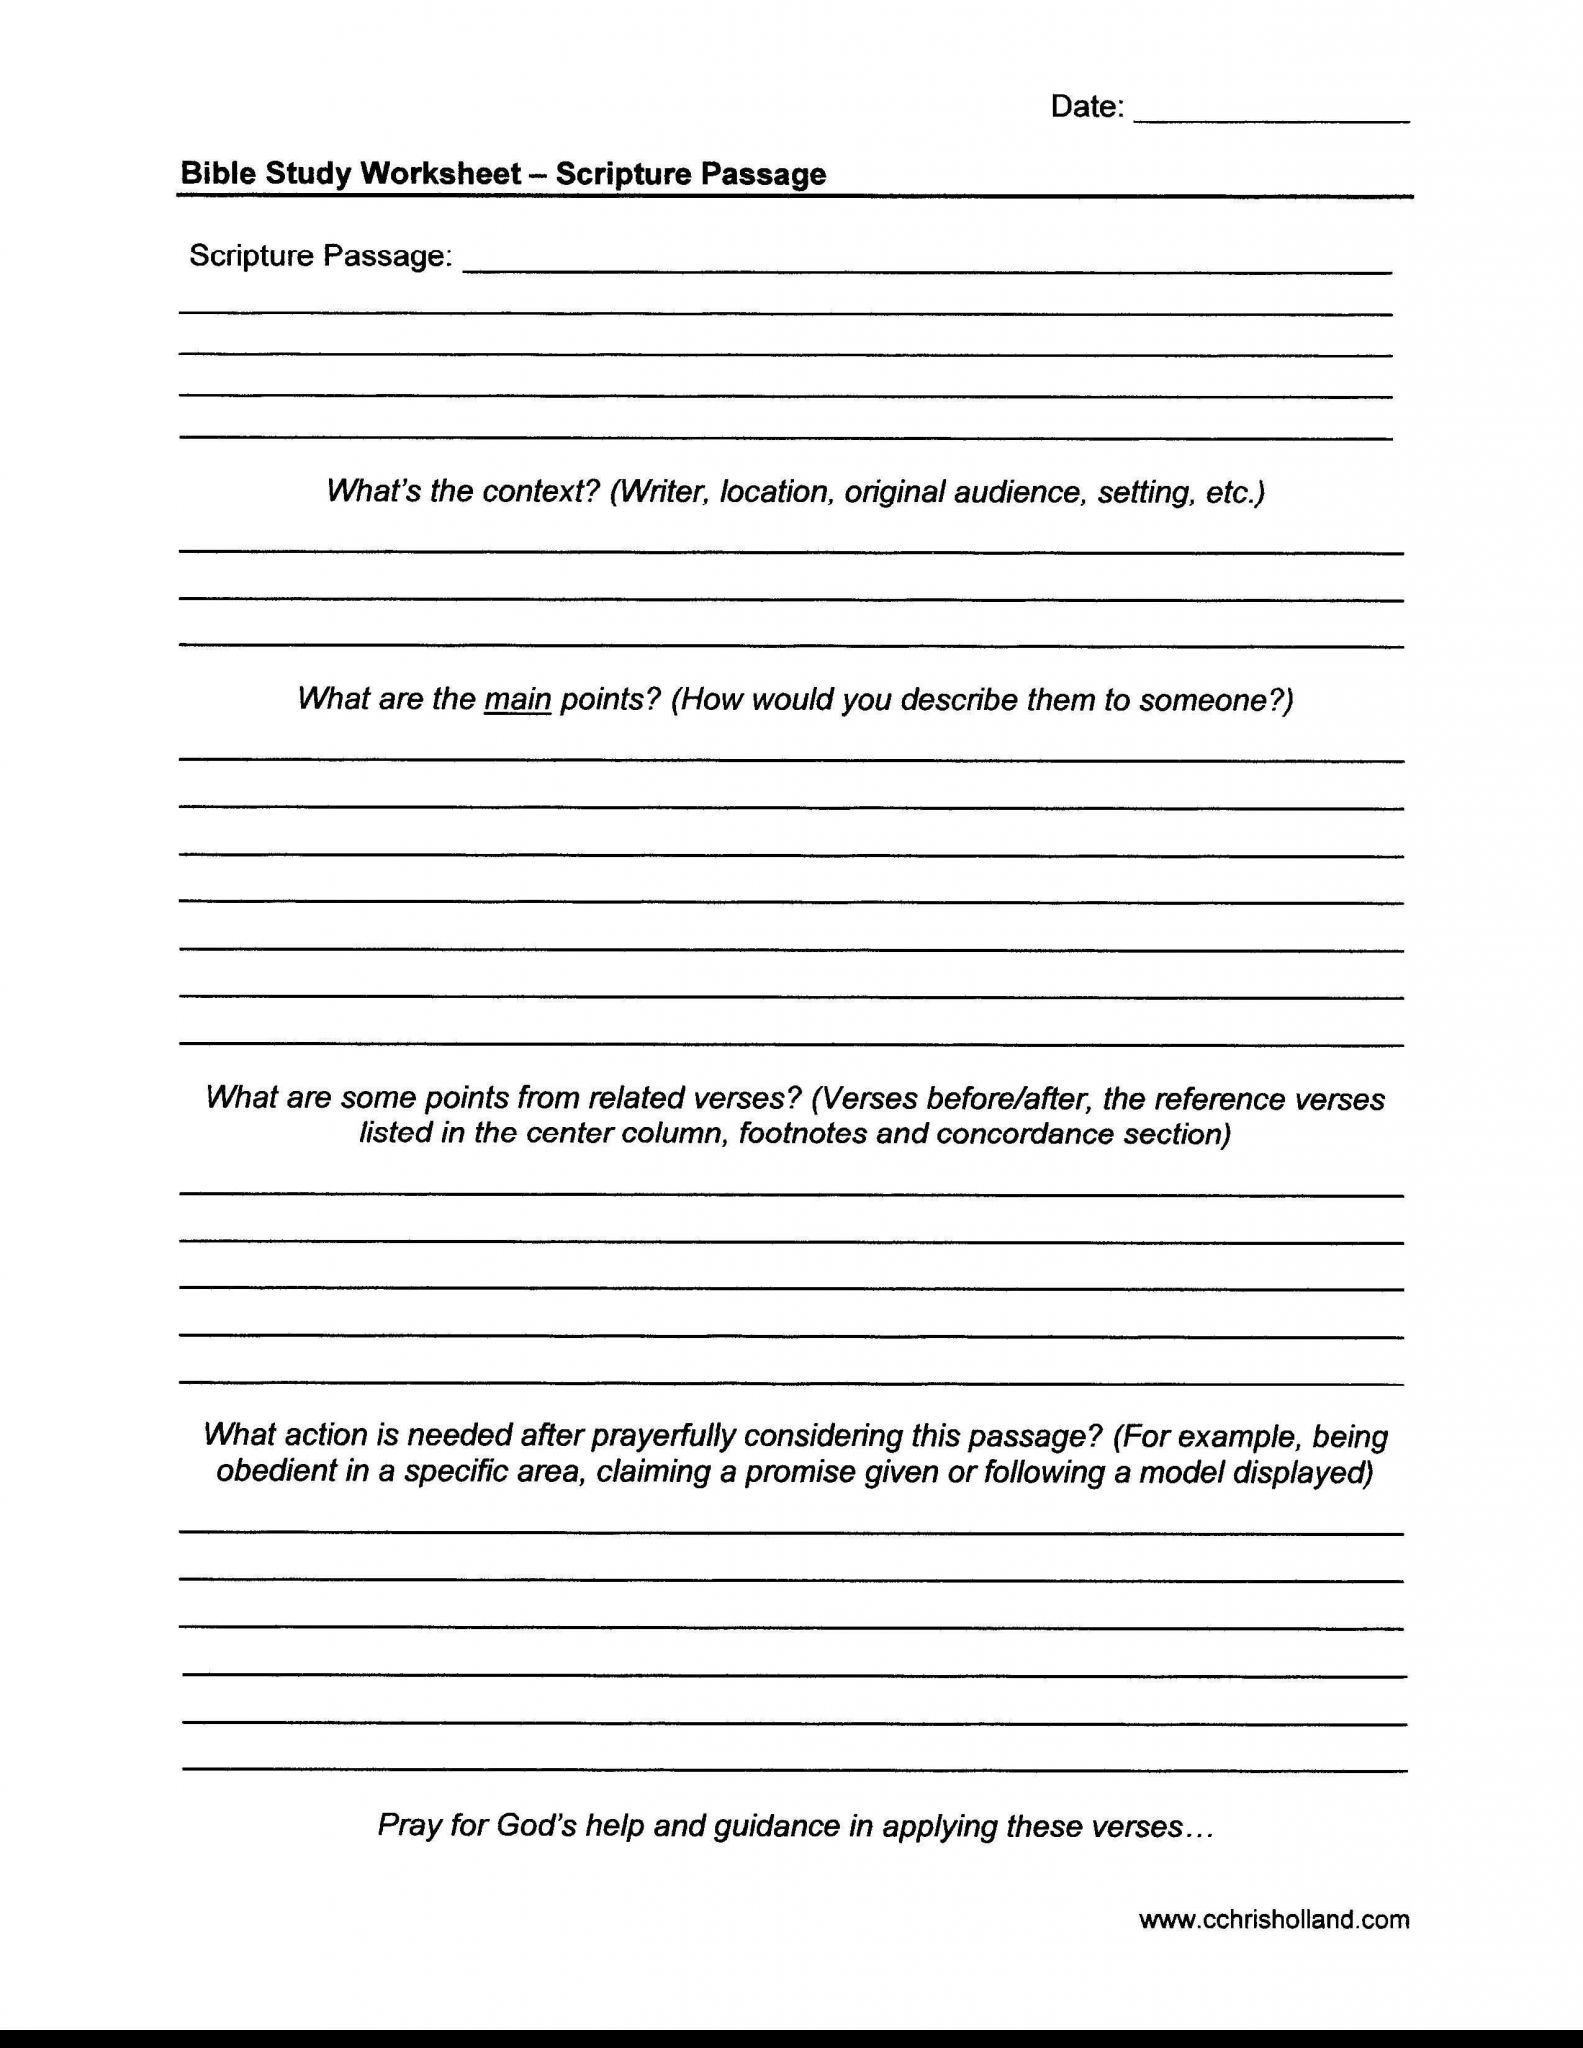 Bible Worksheets for Adults Along with Bible Study Worksheet Scripture Passage1 2 5503 300 Pixels